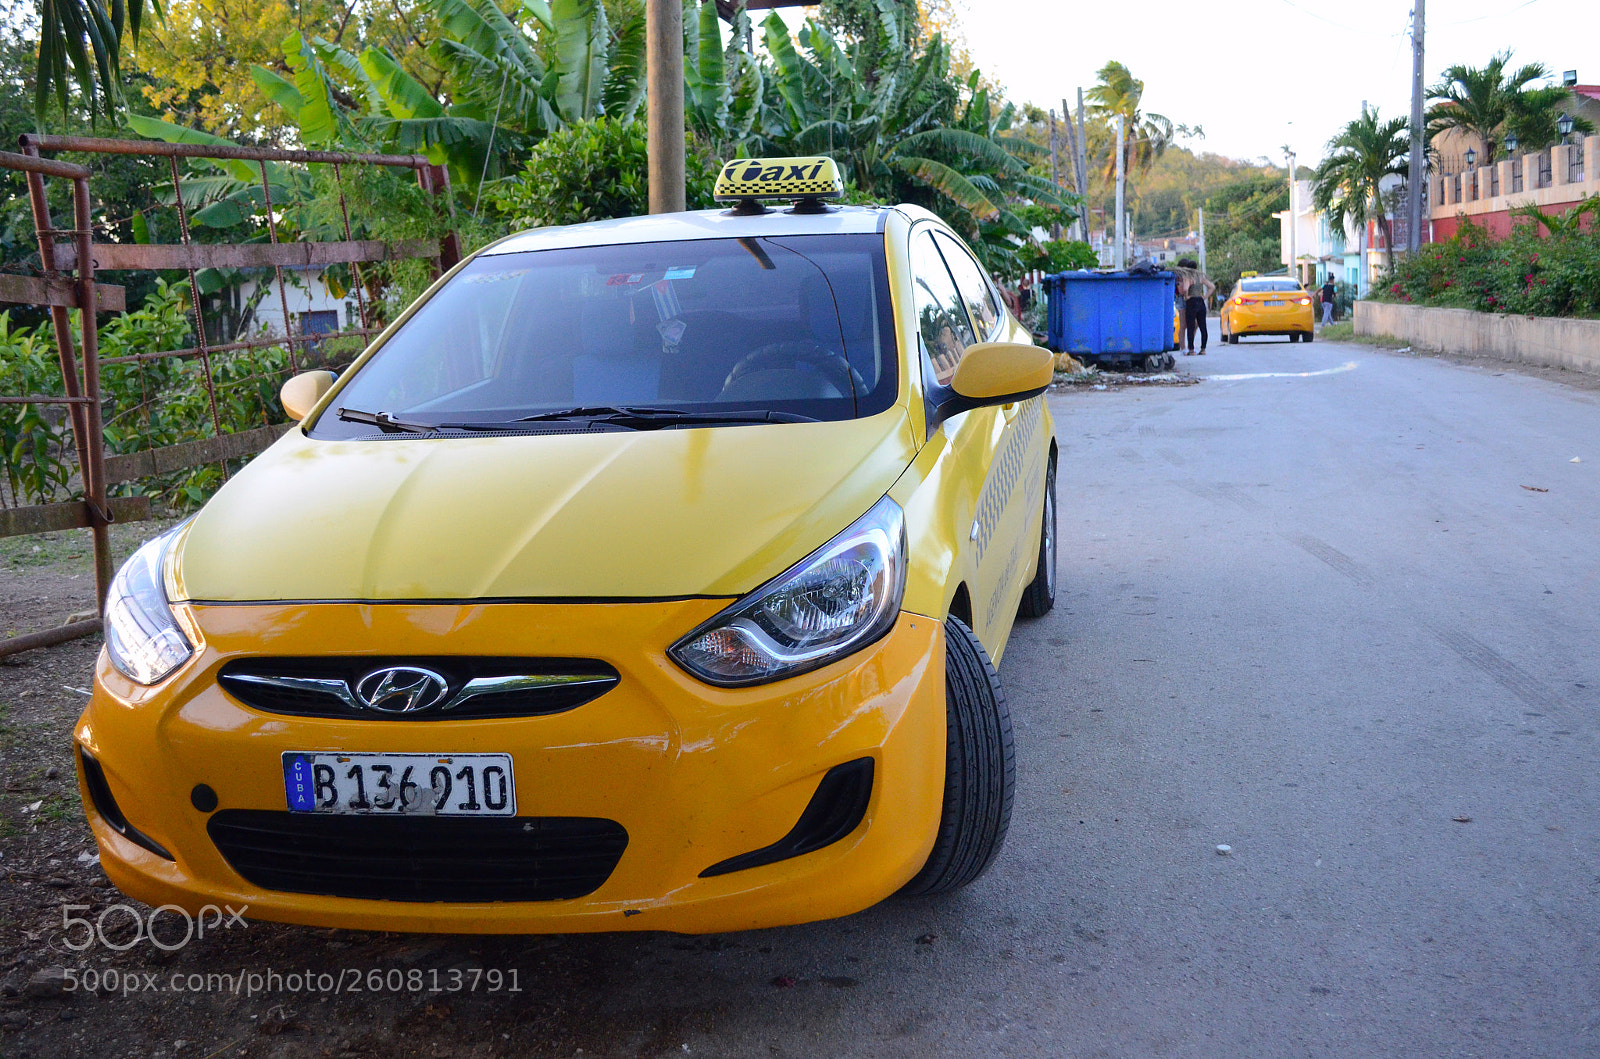 Nikon D7000 sample photo. Private cars serving as photography